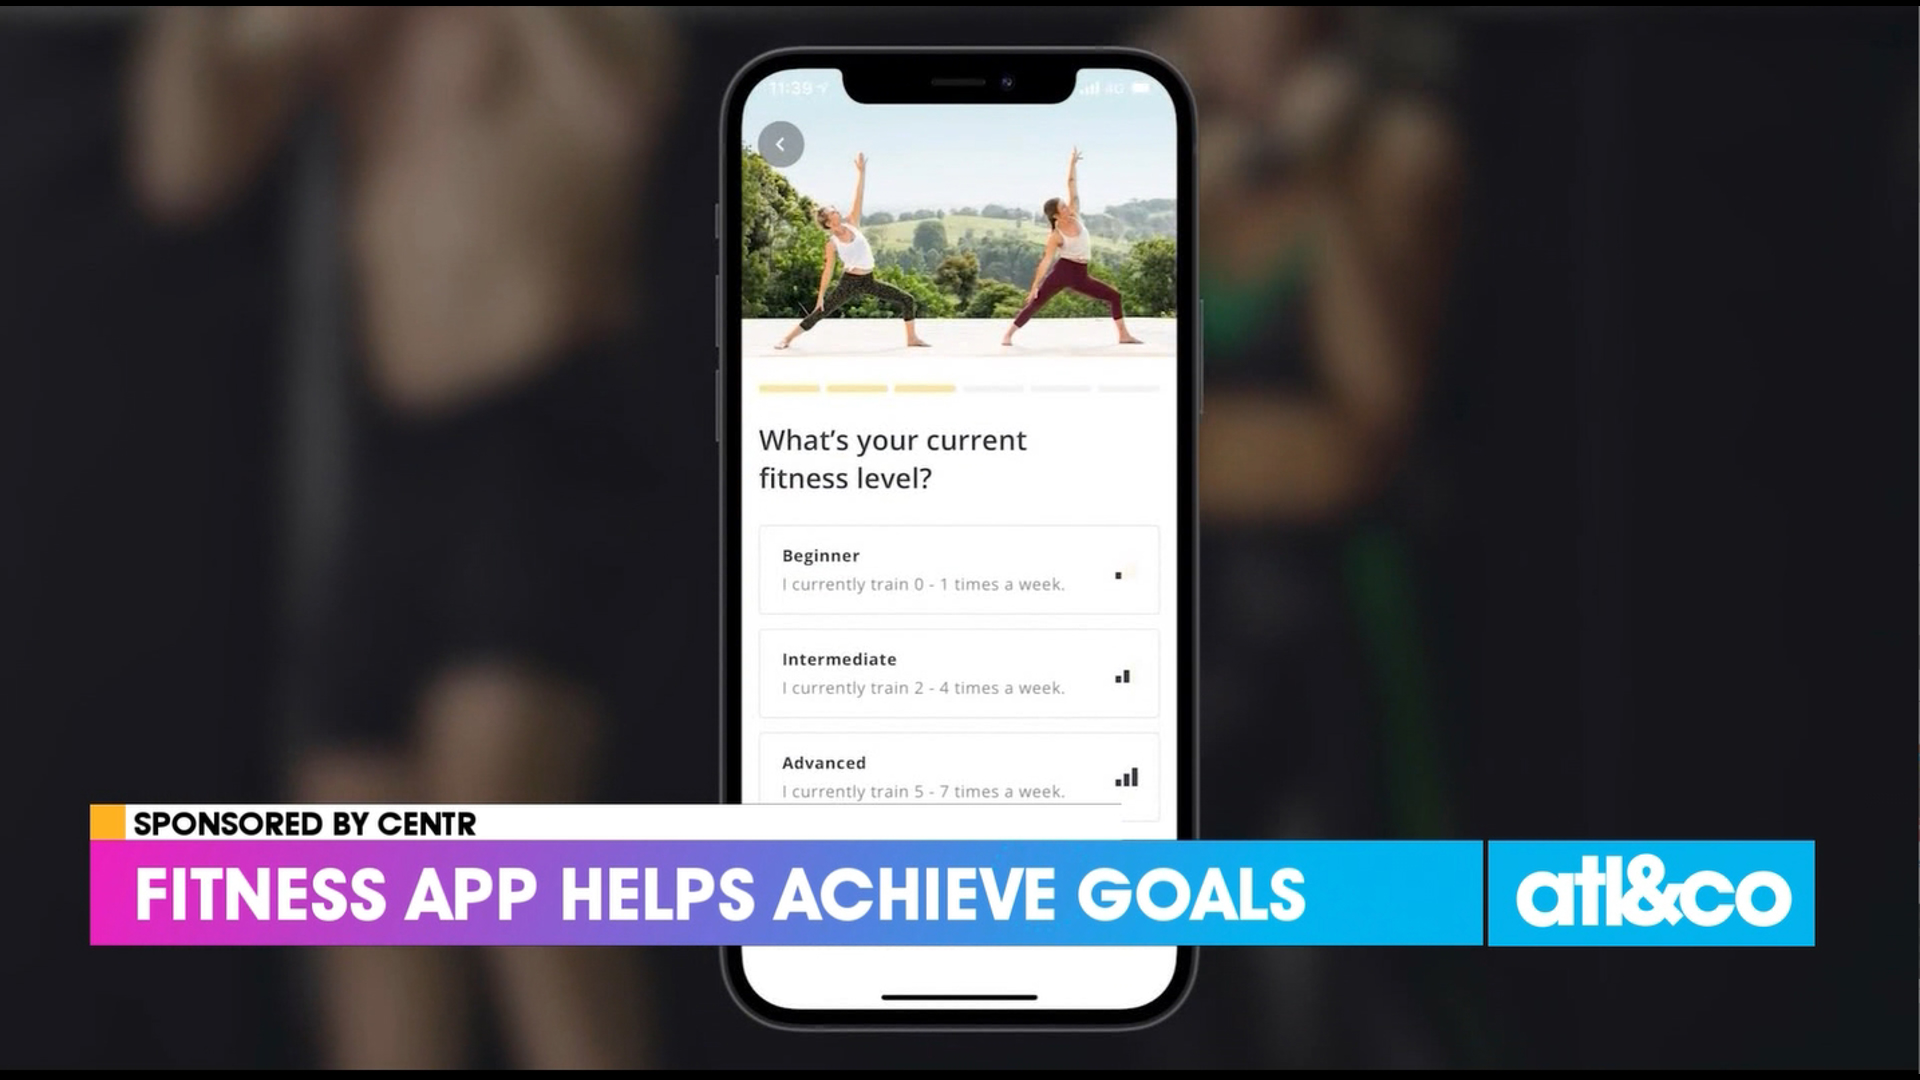 Build your fitness, nutrition, and mental wellness with the Centr app by Chris Hemsworth.